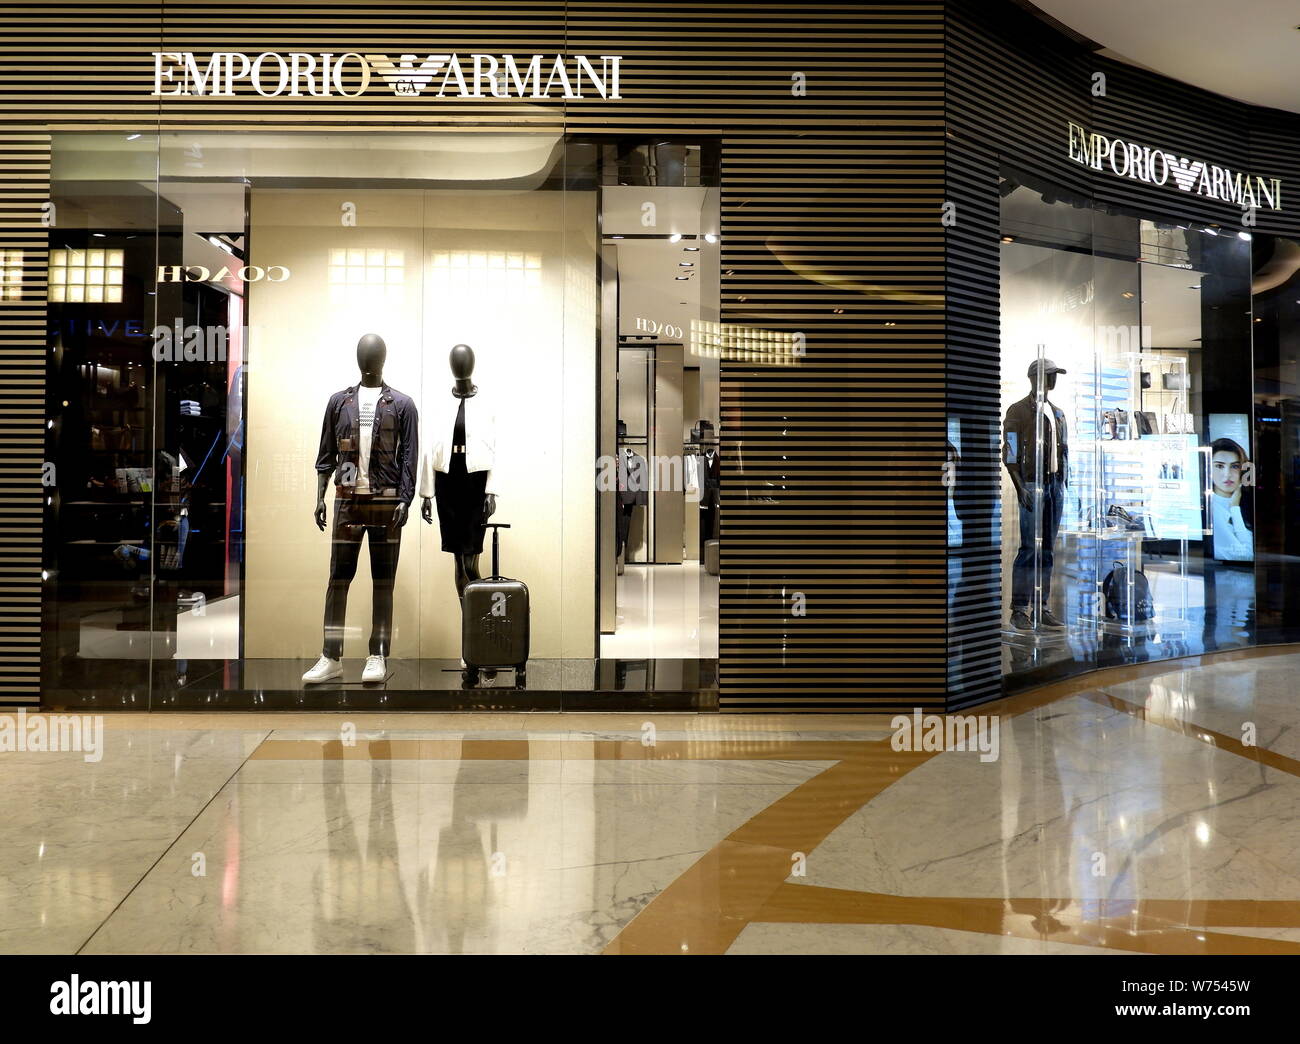 armani exchange quest mall